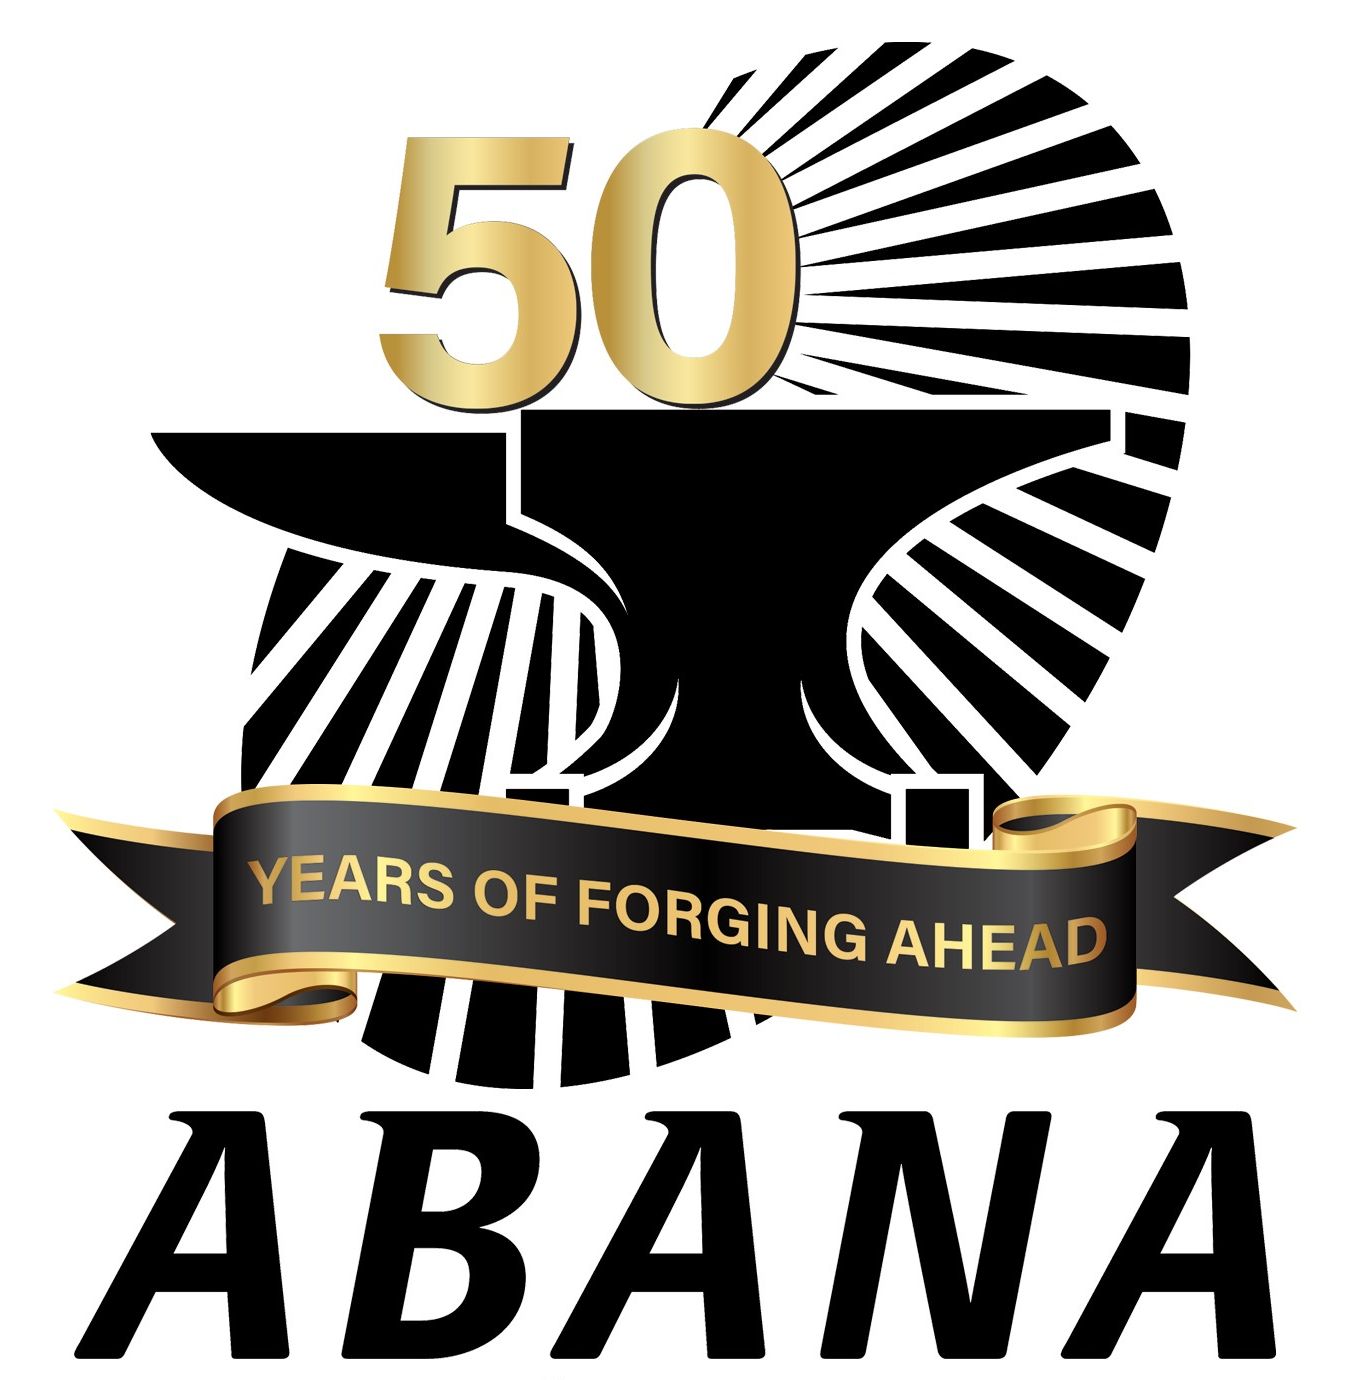 The ABANA anvil logo with a gold and black banner proclaiming 50 years of forging ahead.